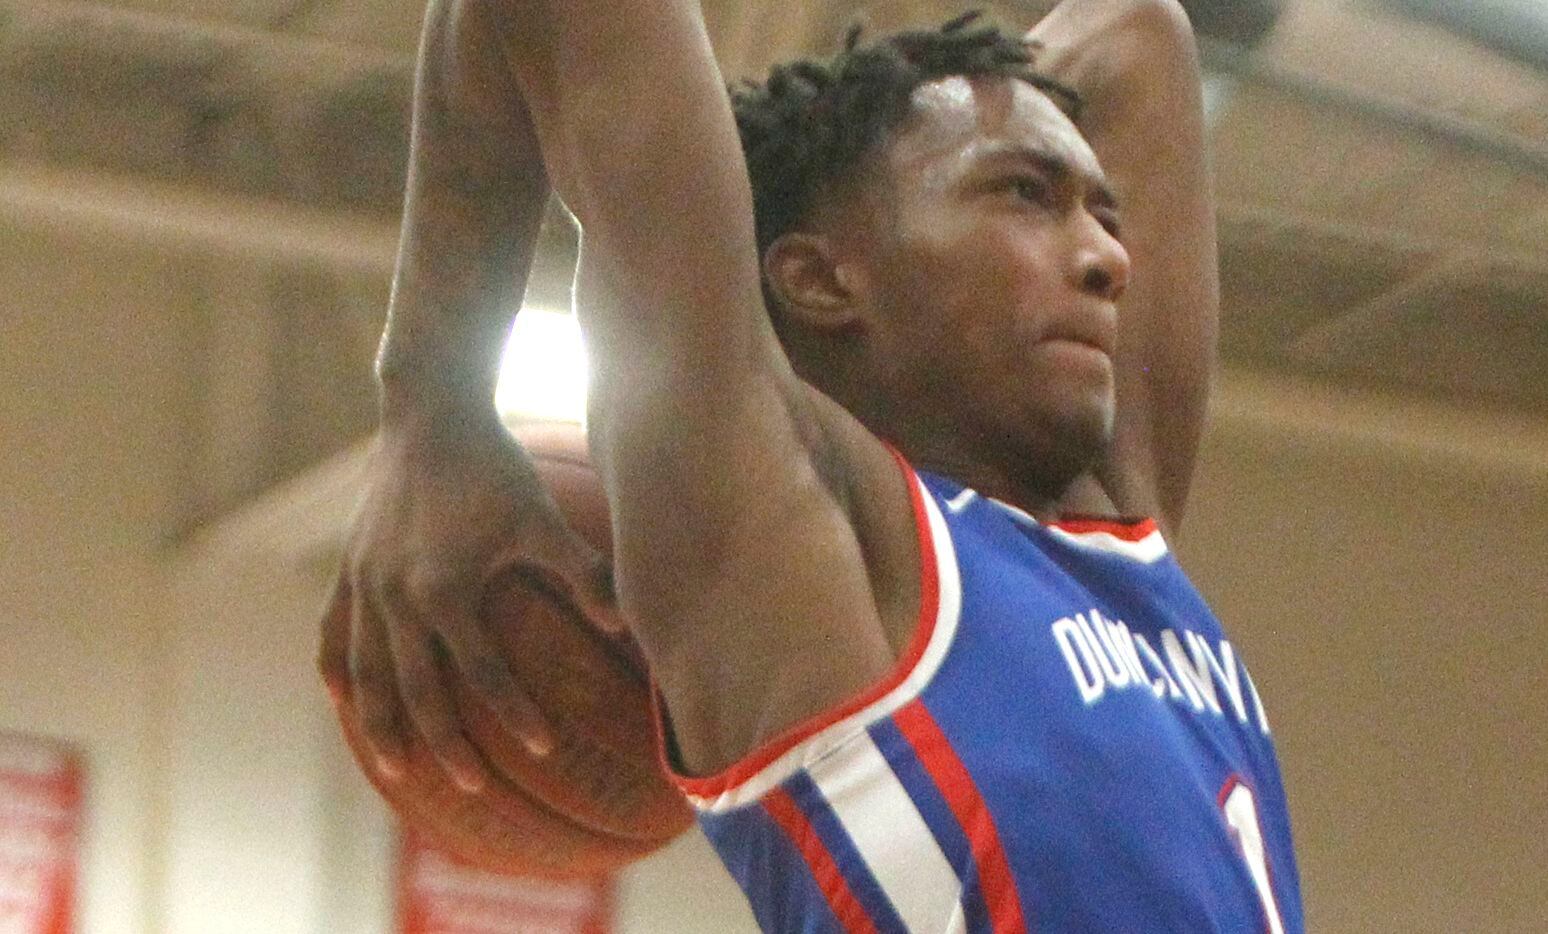 Duncanville forward Ronald Holland (1) skies to the basket to dunk for two of his first half points against Cedar Hill. The two teams played their District 11-6A boys basketball game at Cedar Hill High School in Cedar Hill on January 14, 2022. (Steve Hamm/ Special Contributor)